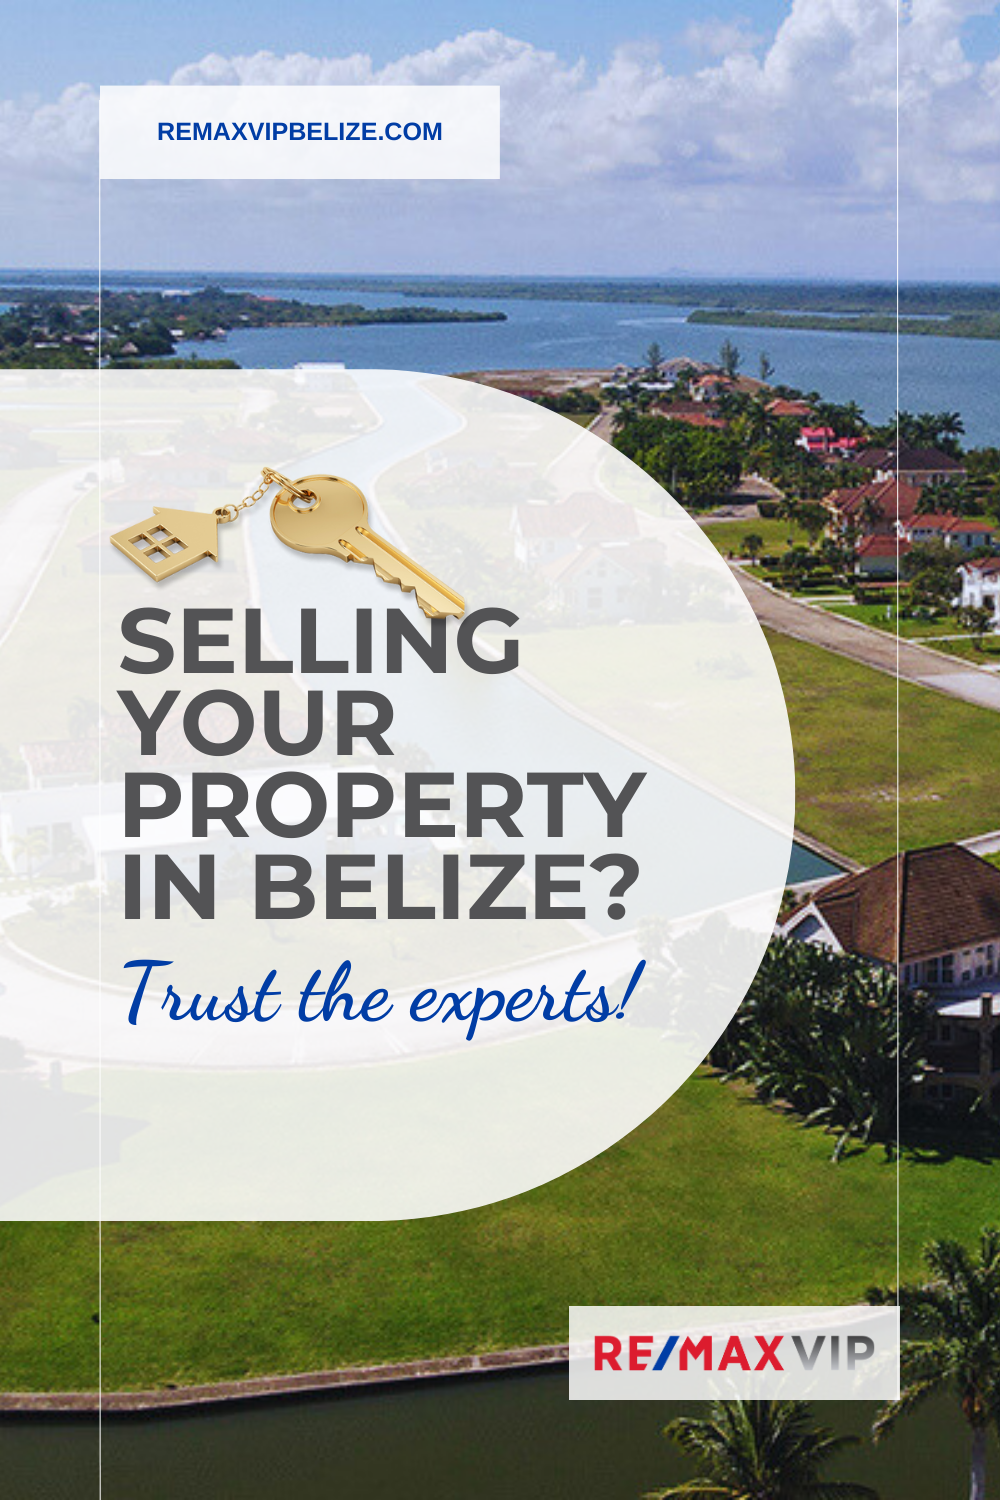 Selling property in Belize? Trust the experts at REMAXVIP